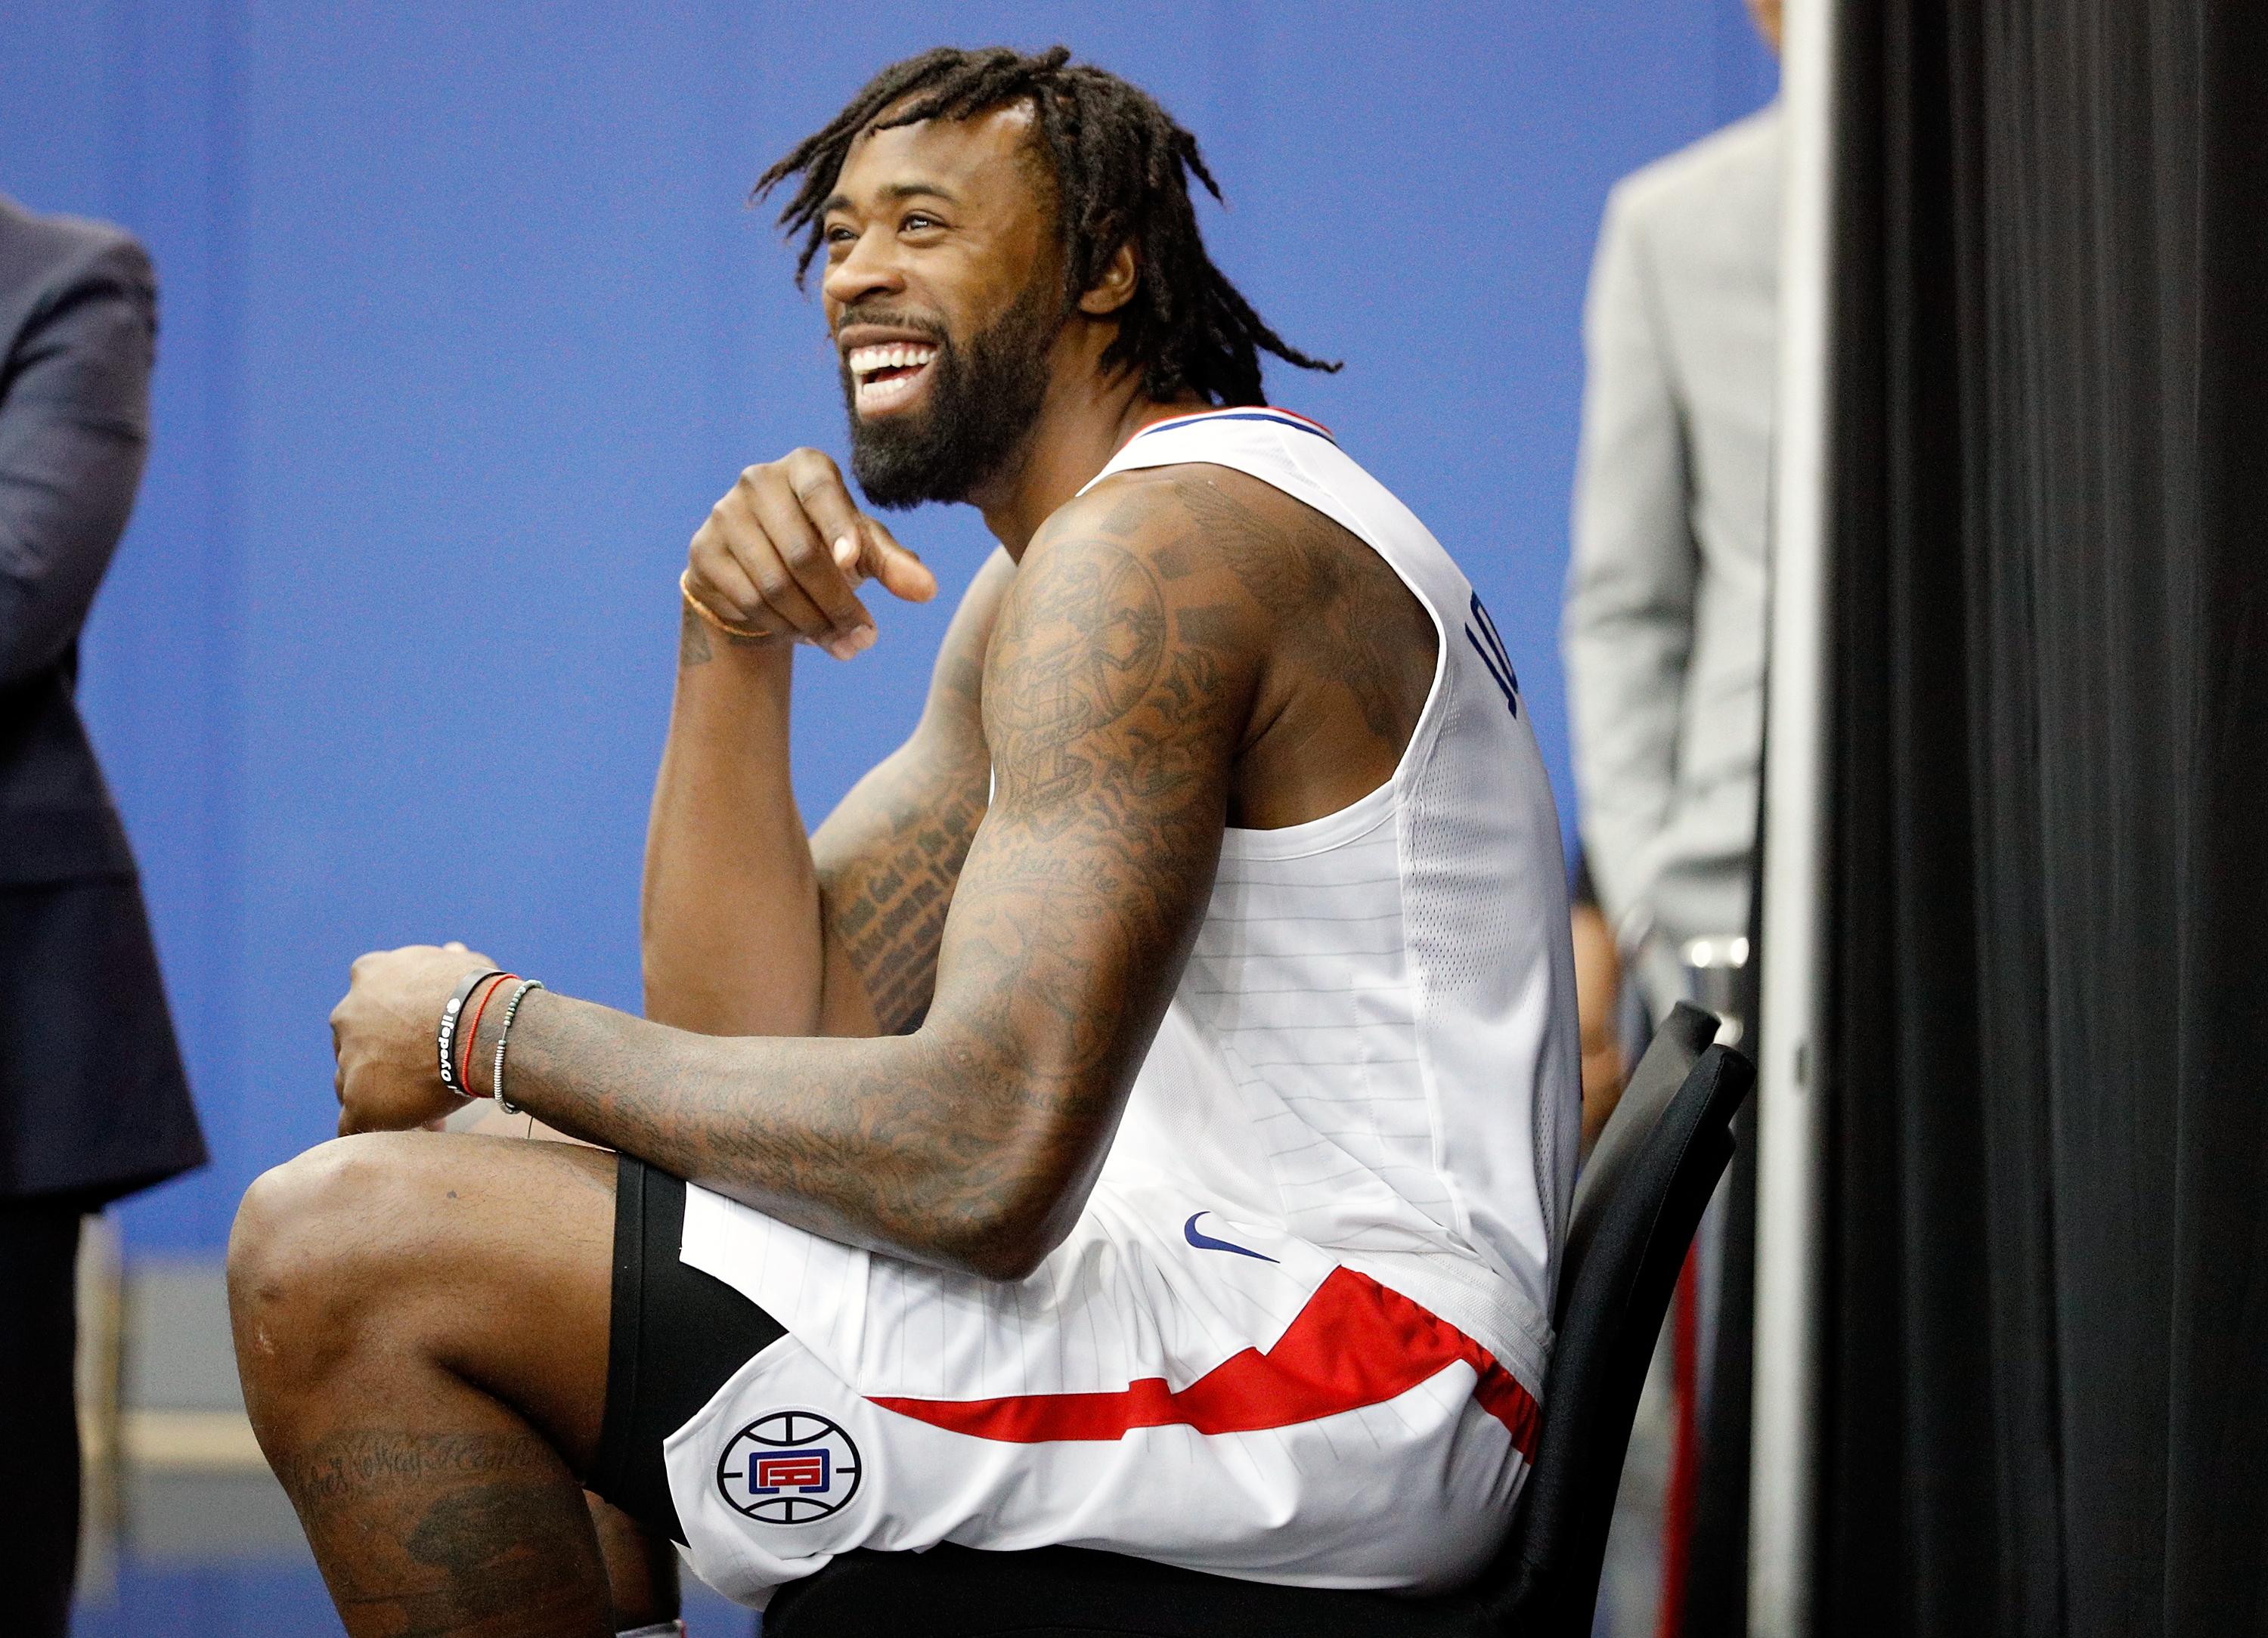 DeAndre Jordan Re-Signs With Clippers As Teammates Camped Out at